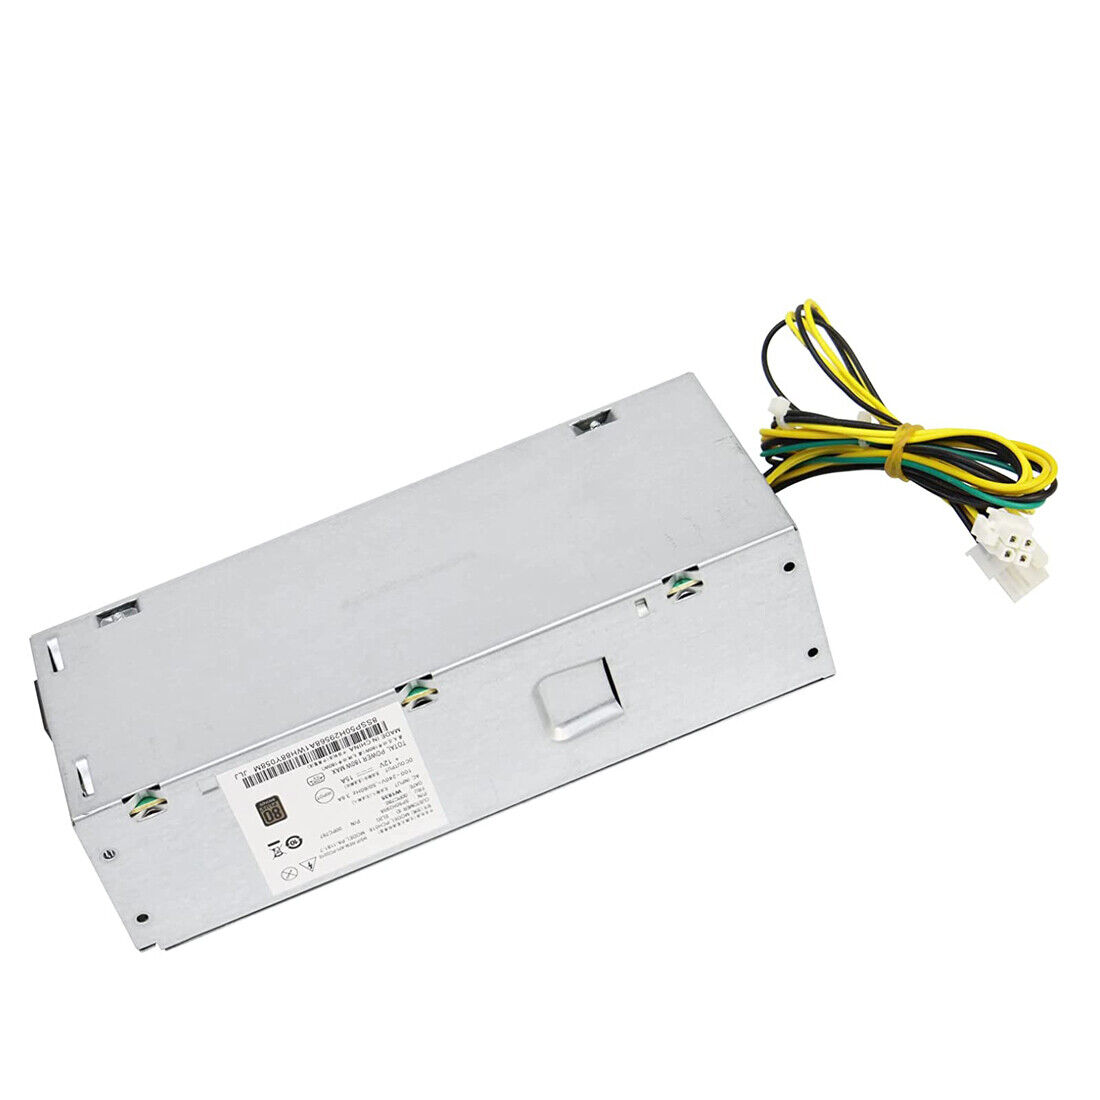 New Power Supply 180W  Fits HP ProDesk 400 G4 Series PA-1181-7 PCH018 906189-001